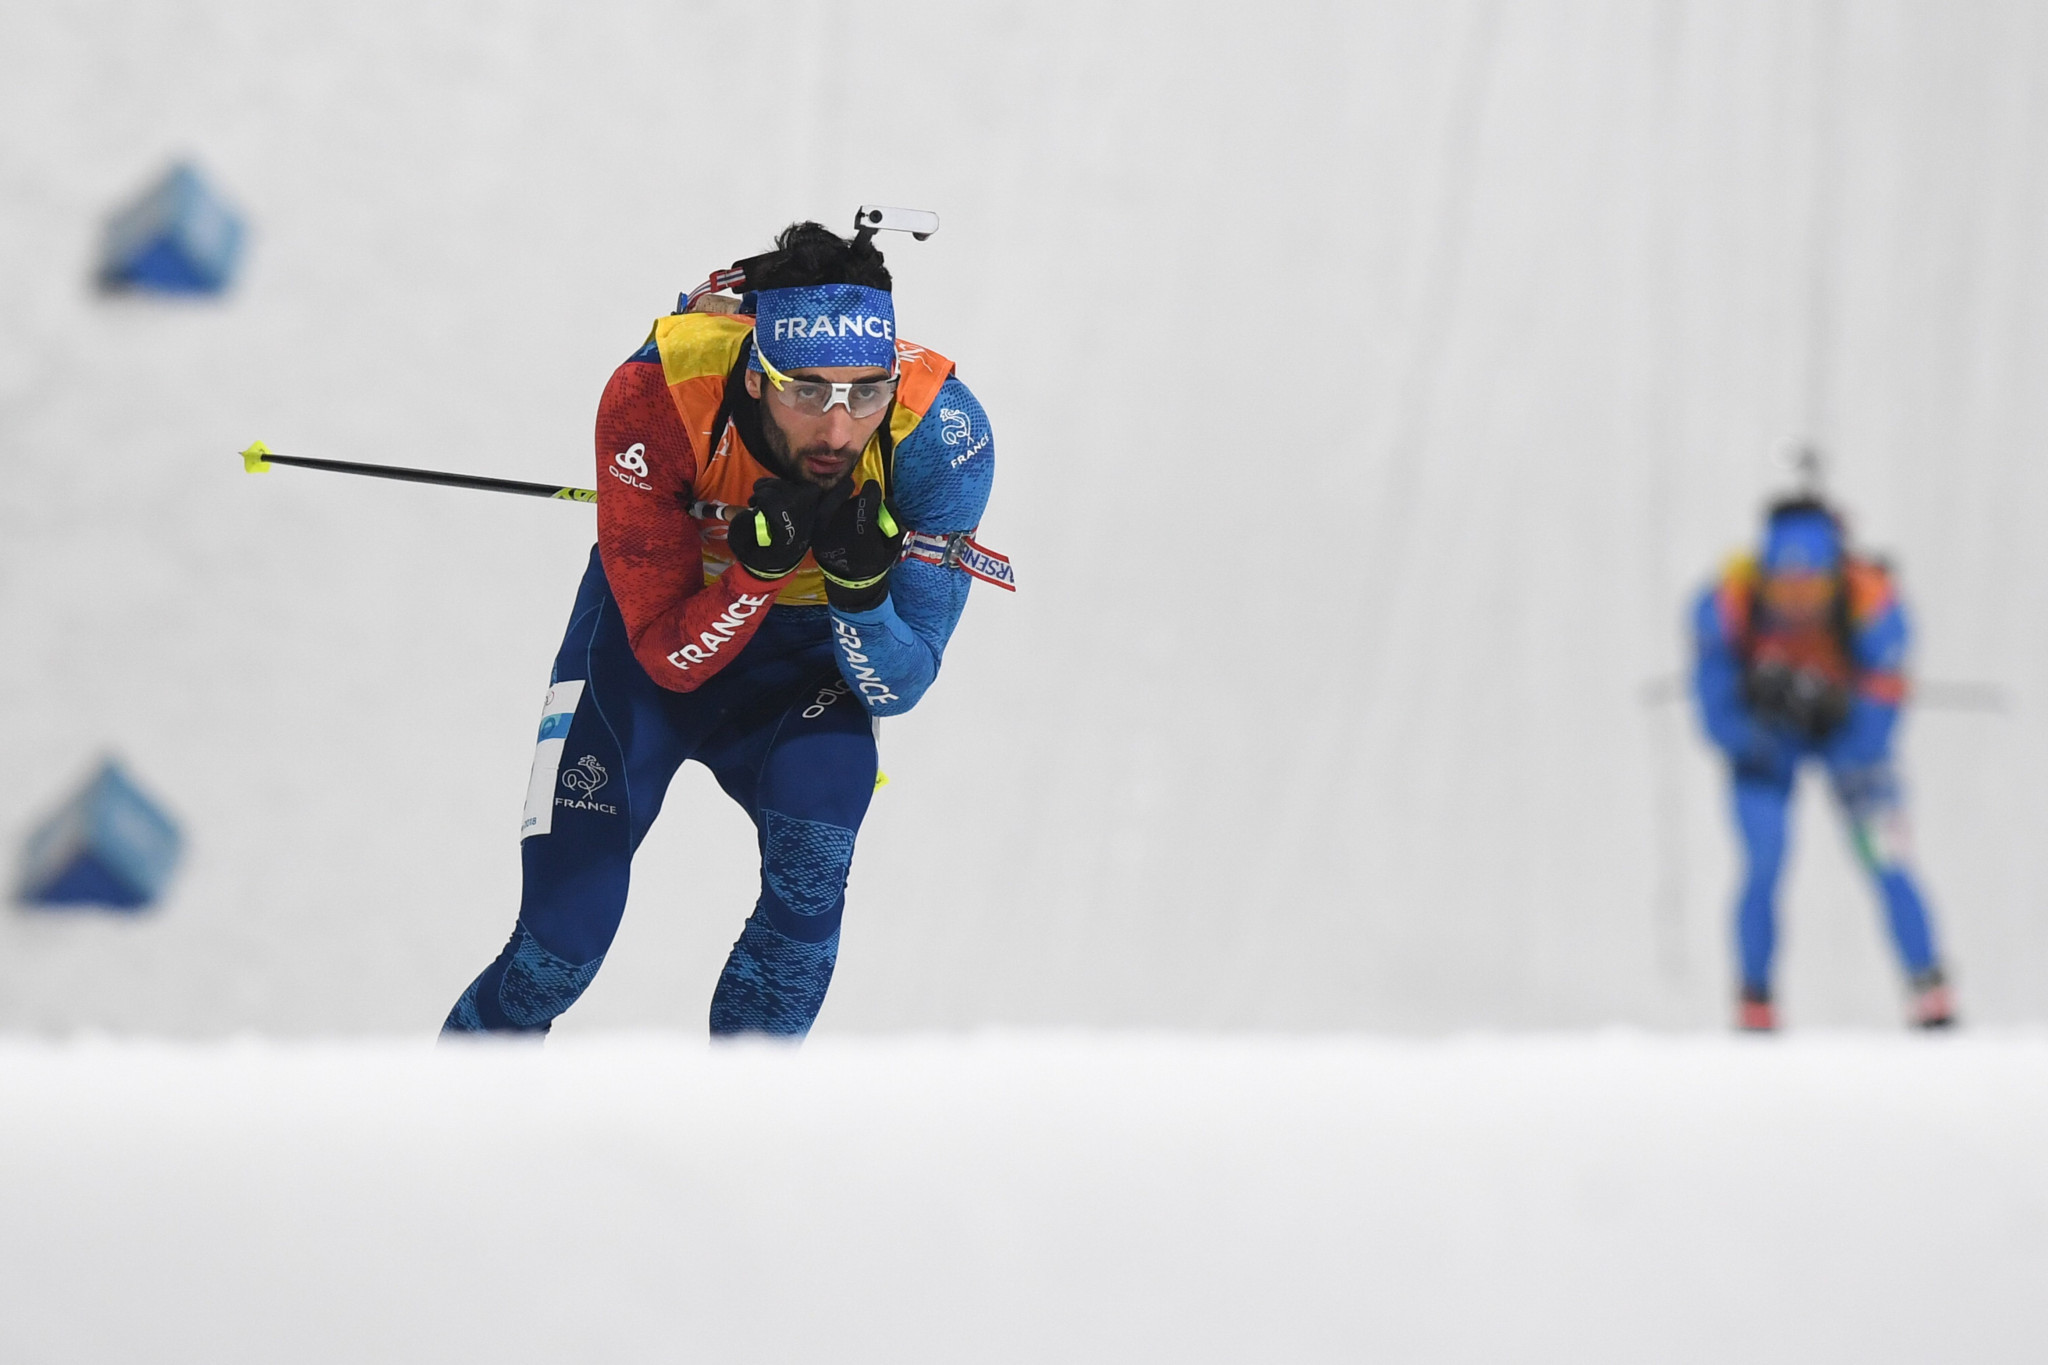 French star Martin Fourcade will resume his pursuit of defending his overall title when the season resumes this week ©Getty Images